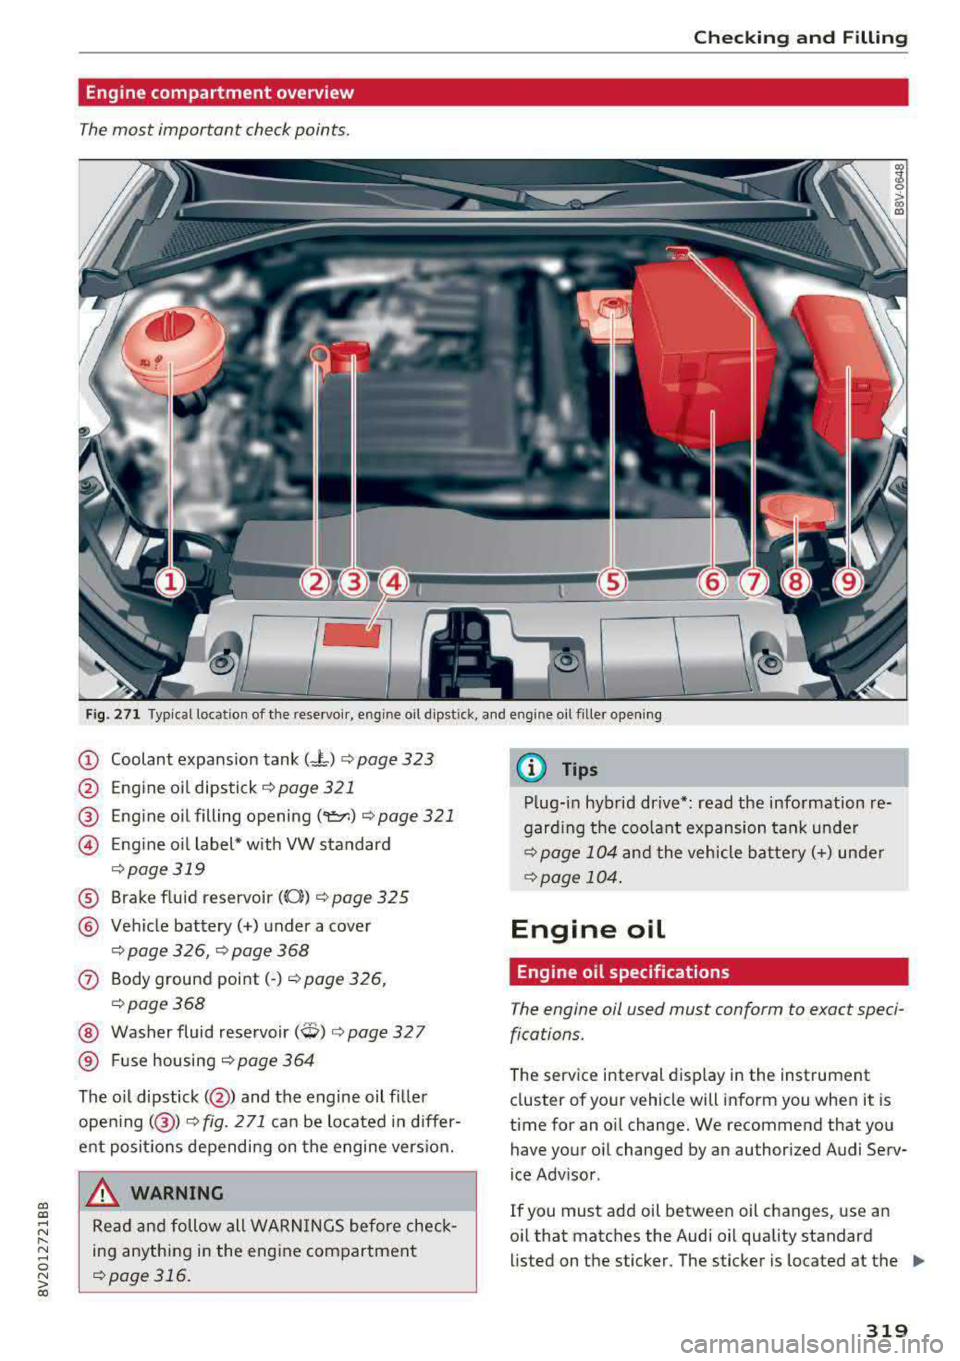 AUDI A3 SEDAN 2017  Owners Manual a,  a, ..... N 
" N ..... 0 N > 00 
Checking  and Filling 
Engine compartment  overview 
The most  important  check points . 
-
Fig. 271 Typical location of  the  reservoir , engine oil dipst ick,  an